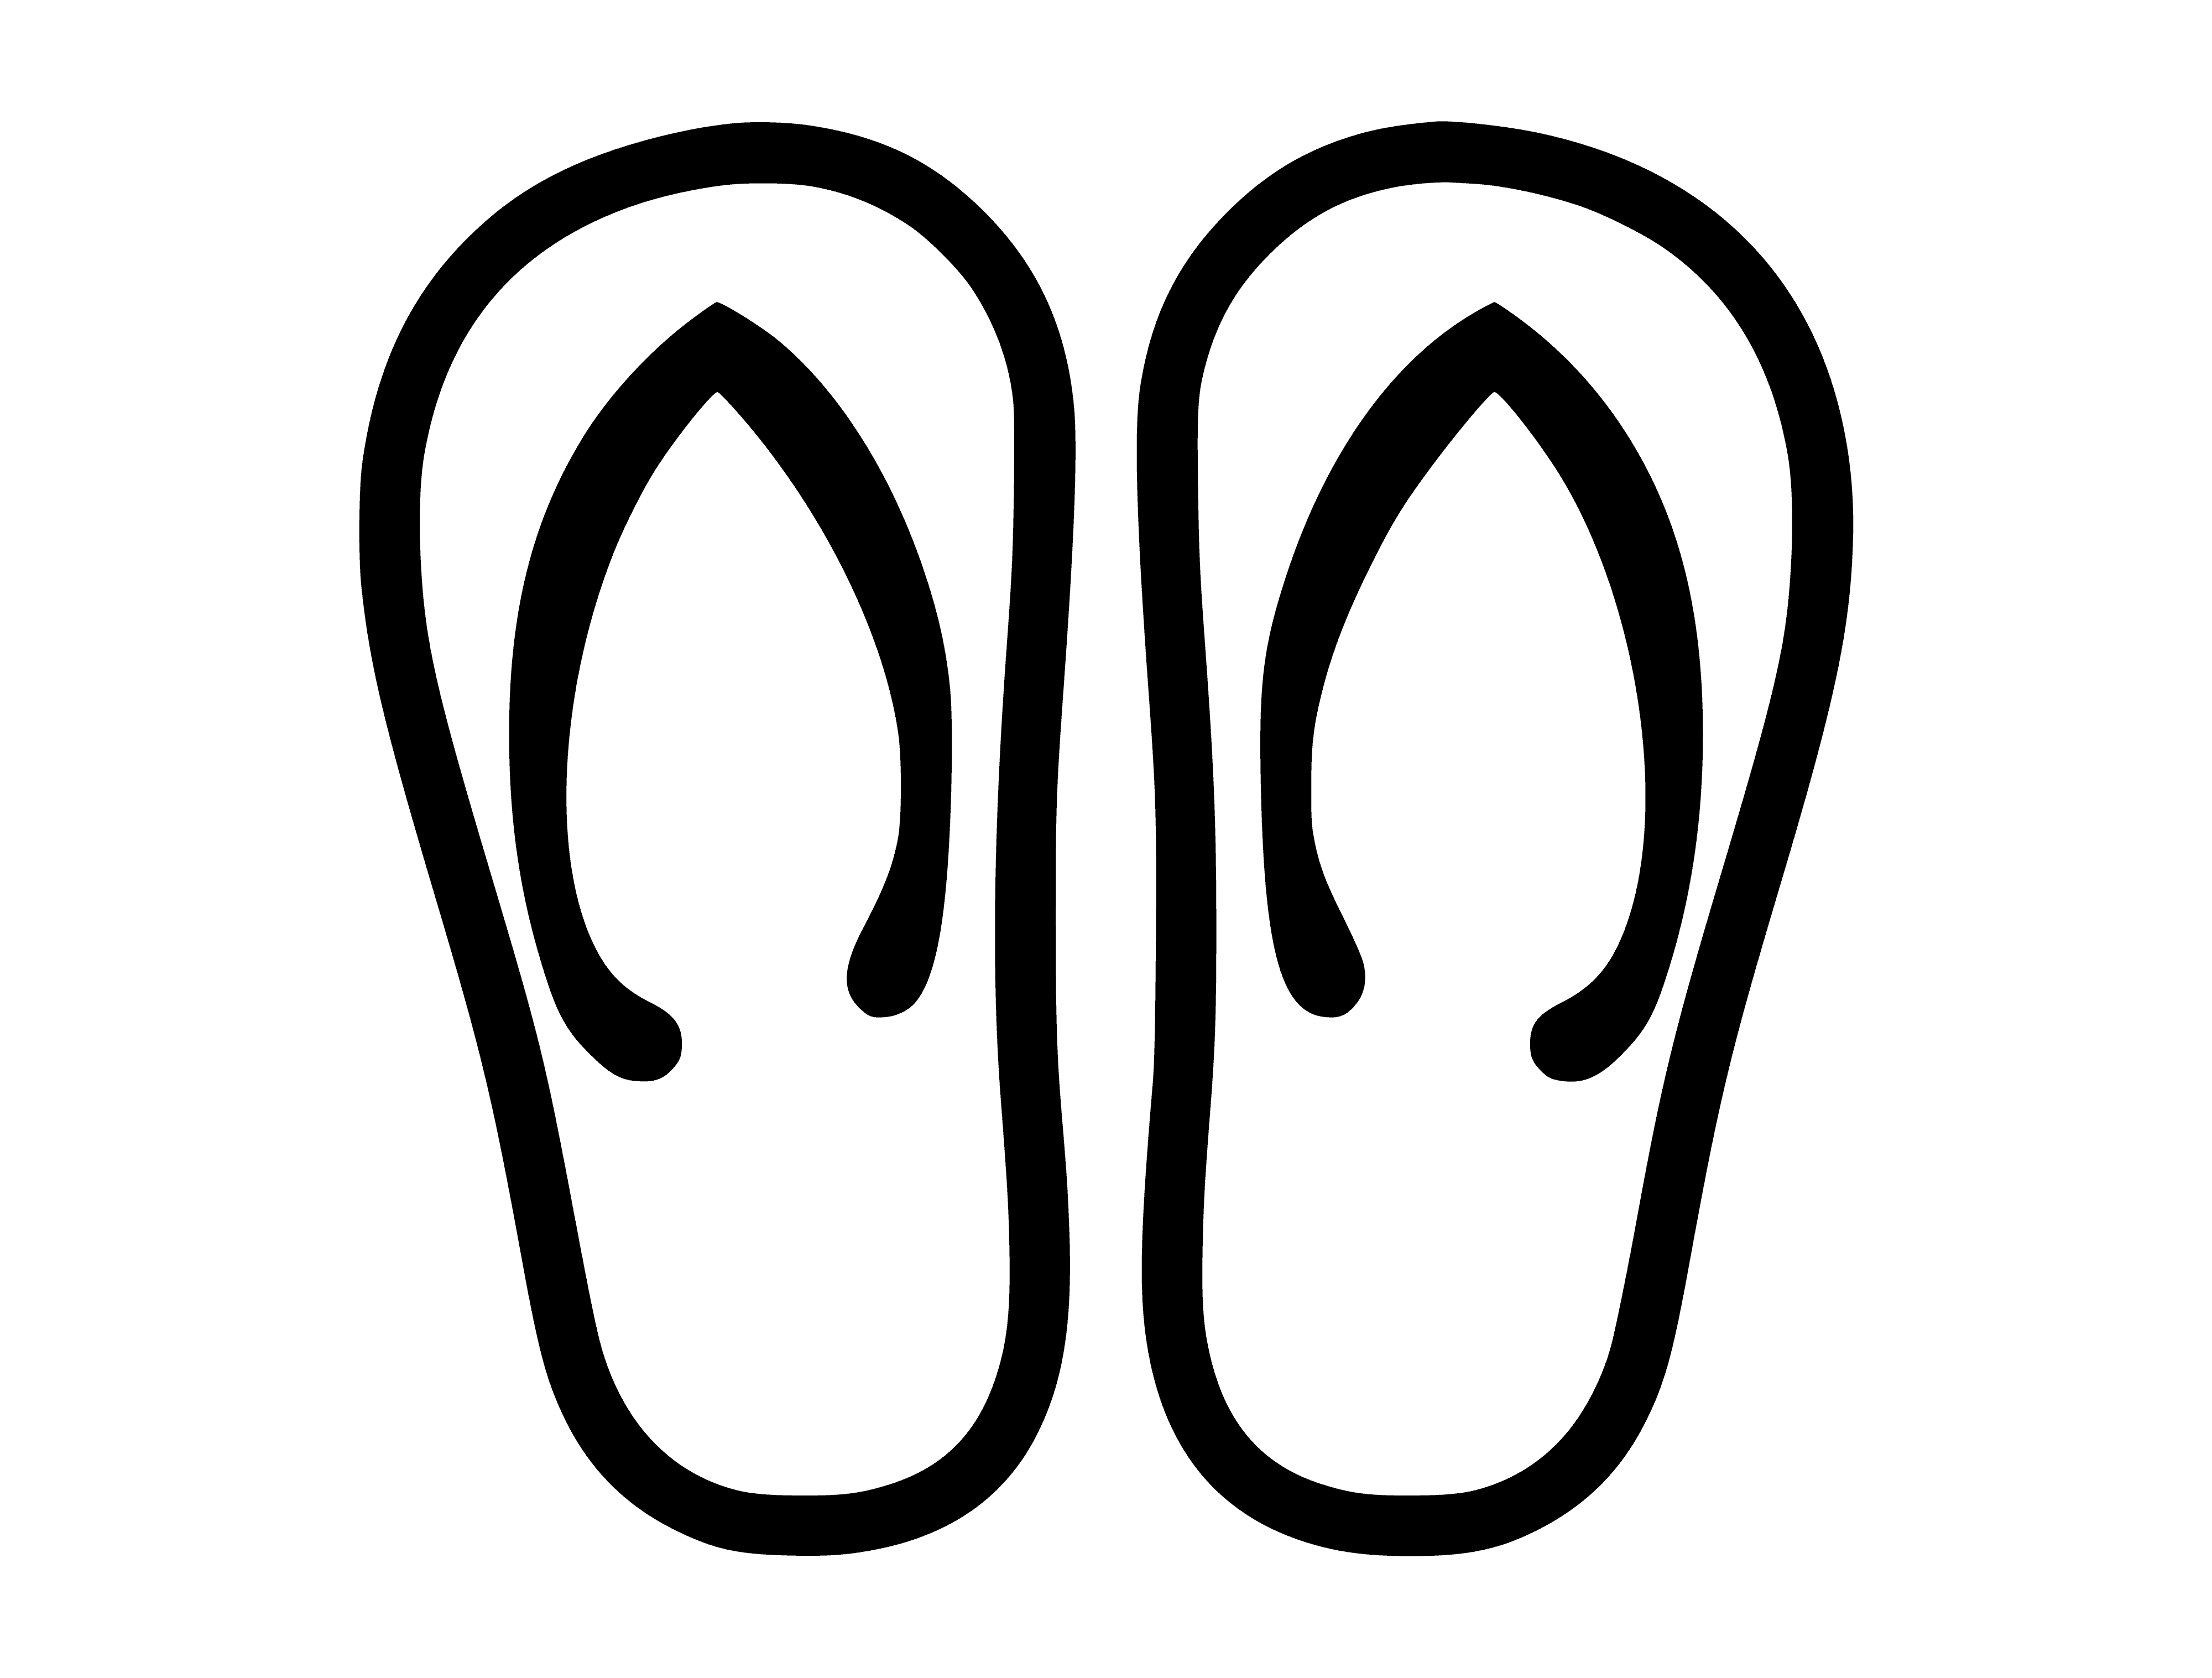 coloring page: A pair of black flip flops w/thin Y-shaped straps & thick ridged soles lies on a white surface. #ShoeLove